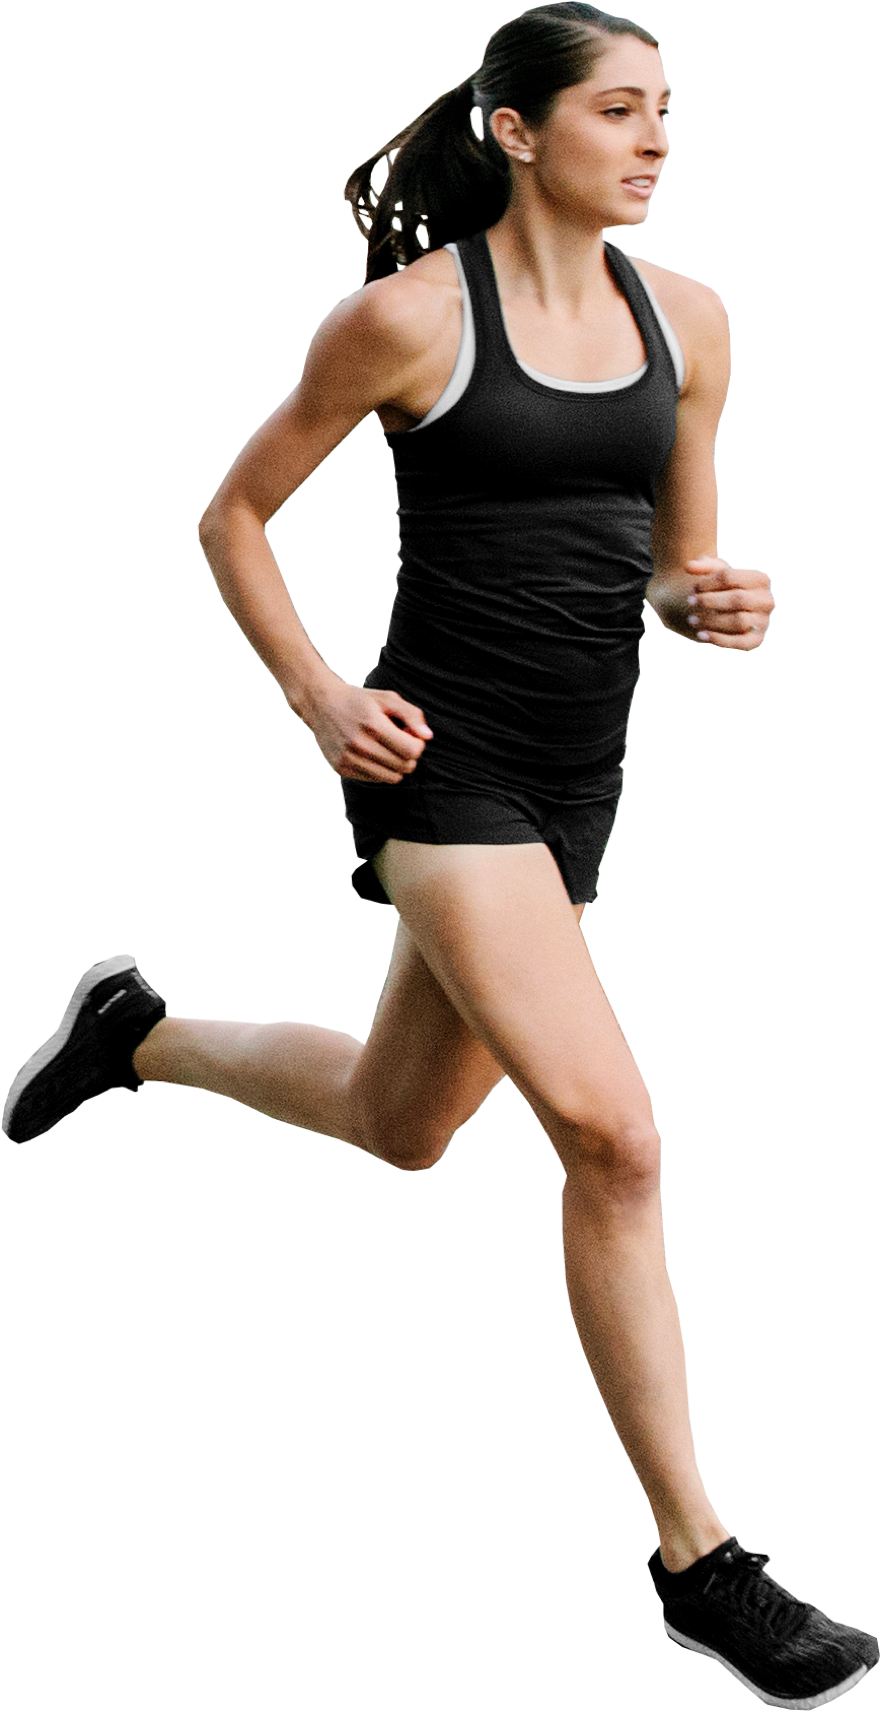 A Woman Running In A Black Tank Top And Shorts